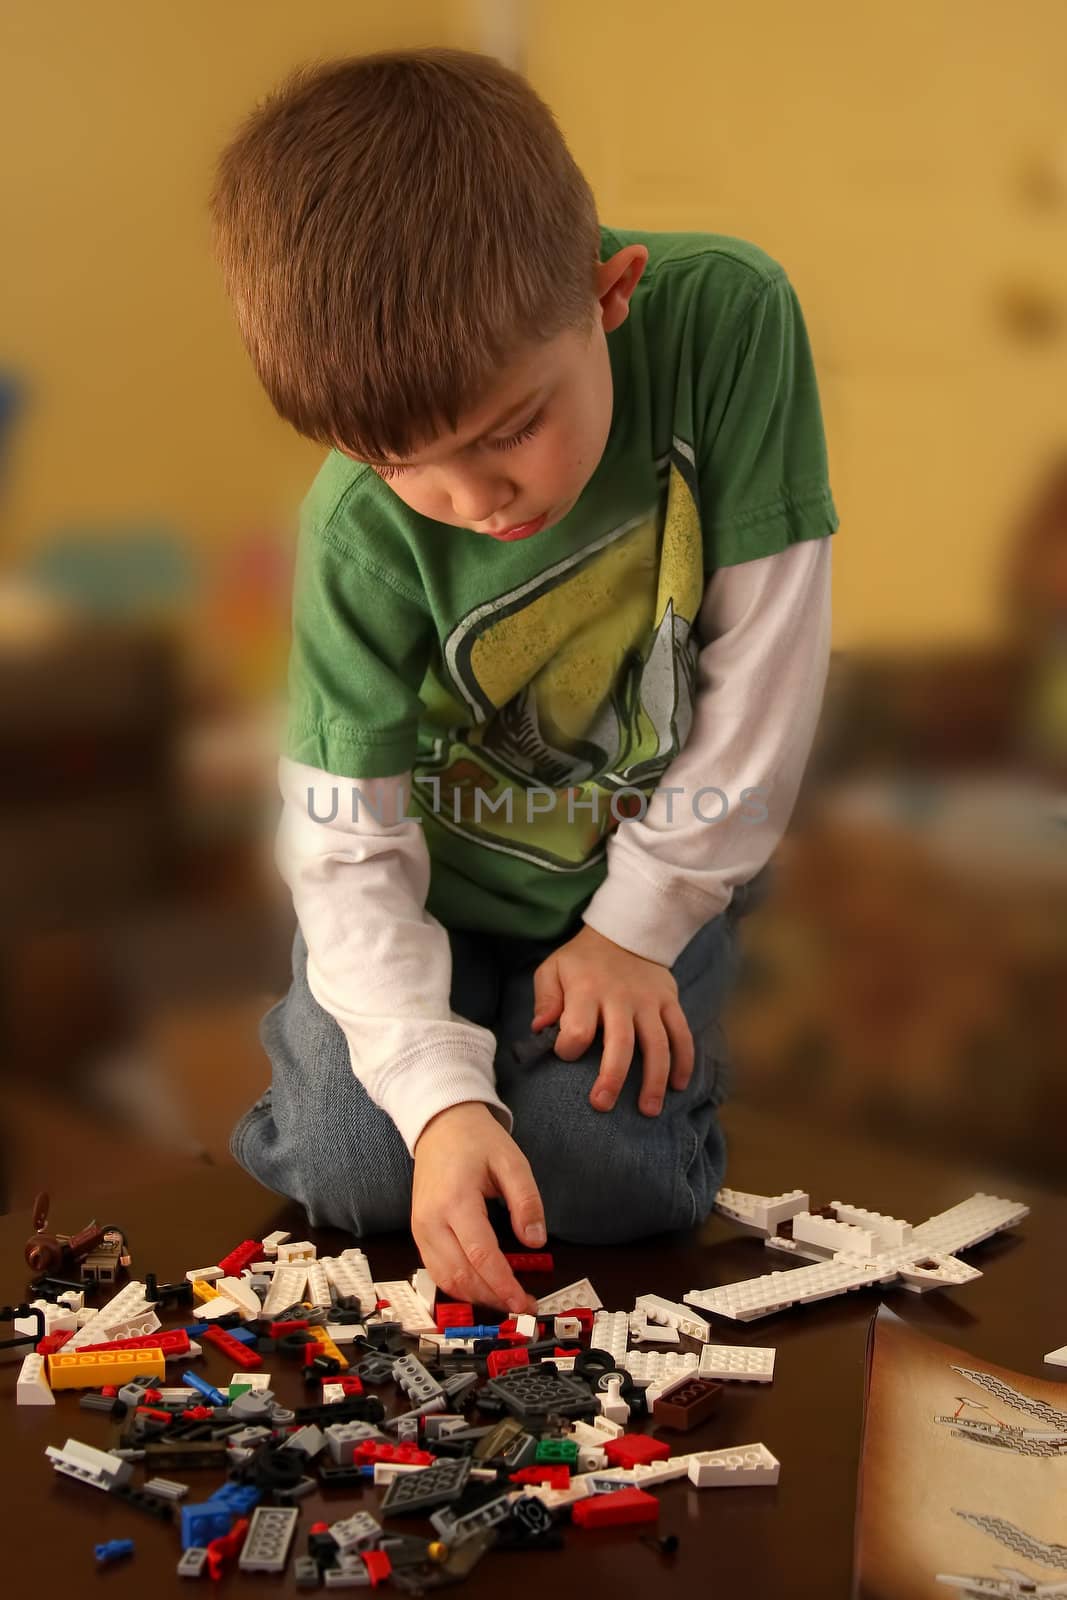 Young Boy Building an airplane with blocks.